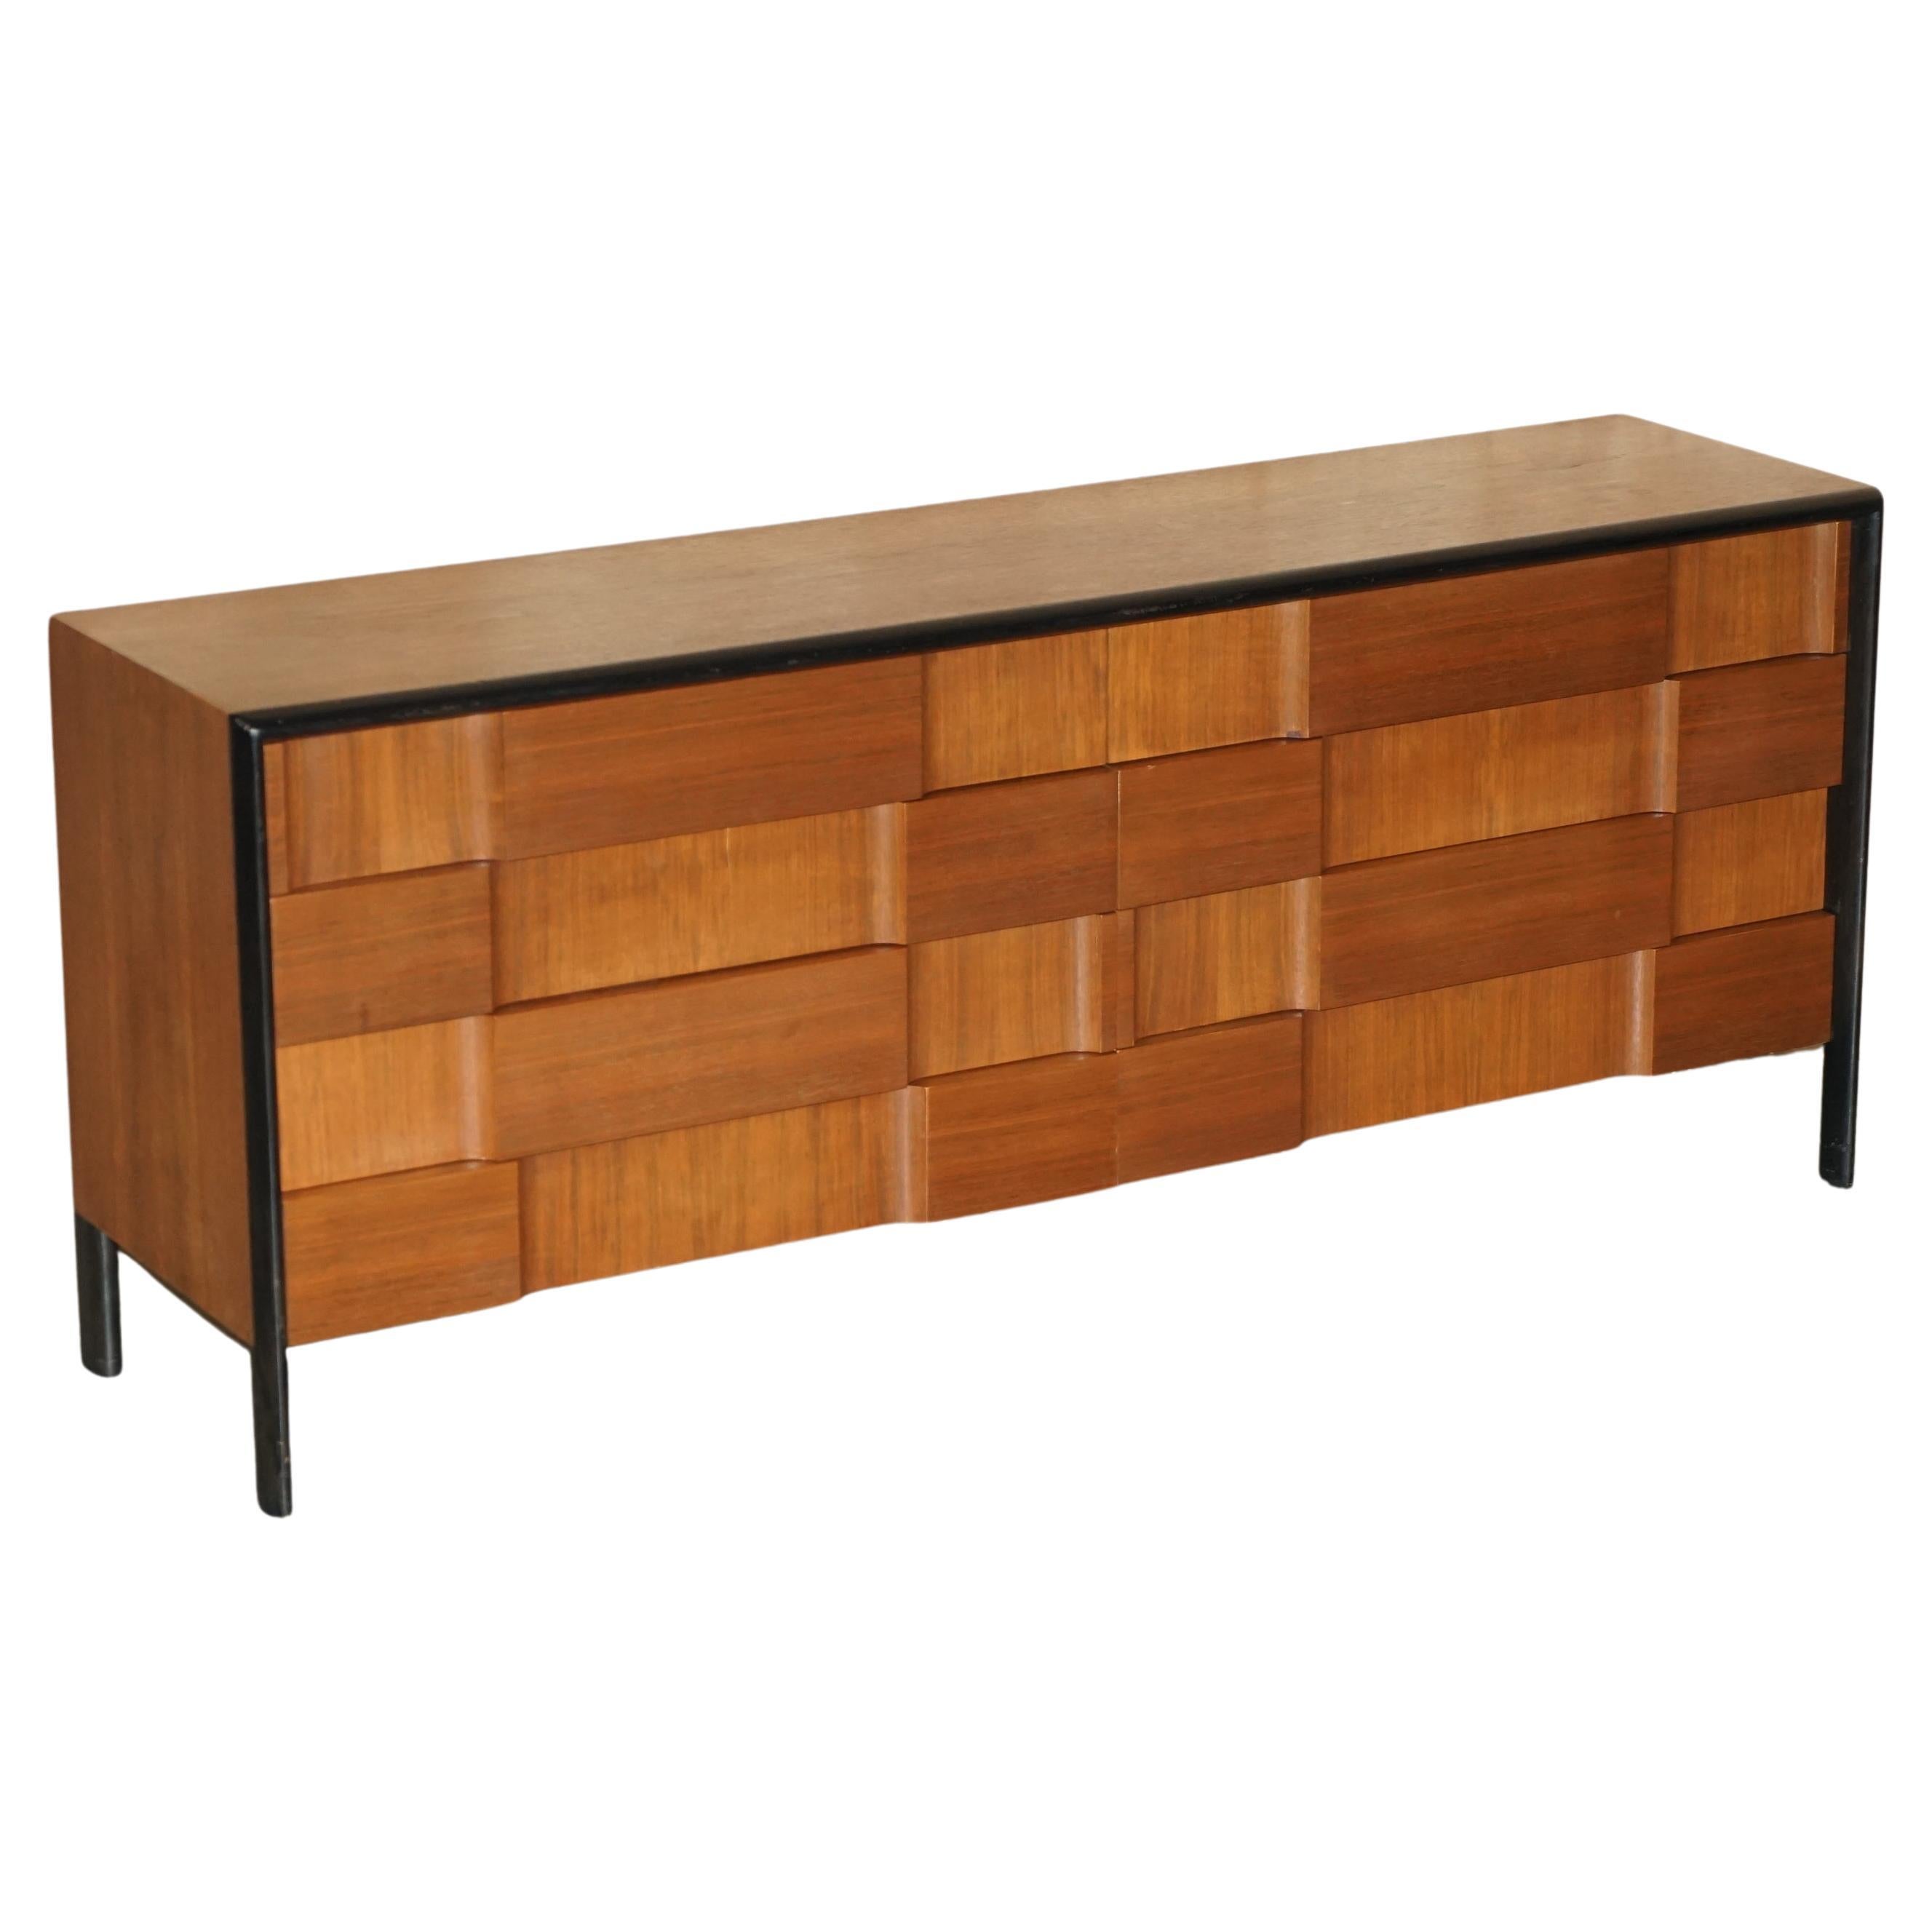 Rare Mid-Century Modern Edmond J Spence Checkerboard Sideboard Chest of Drawers For Sale